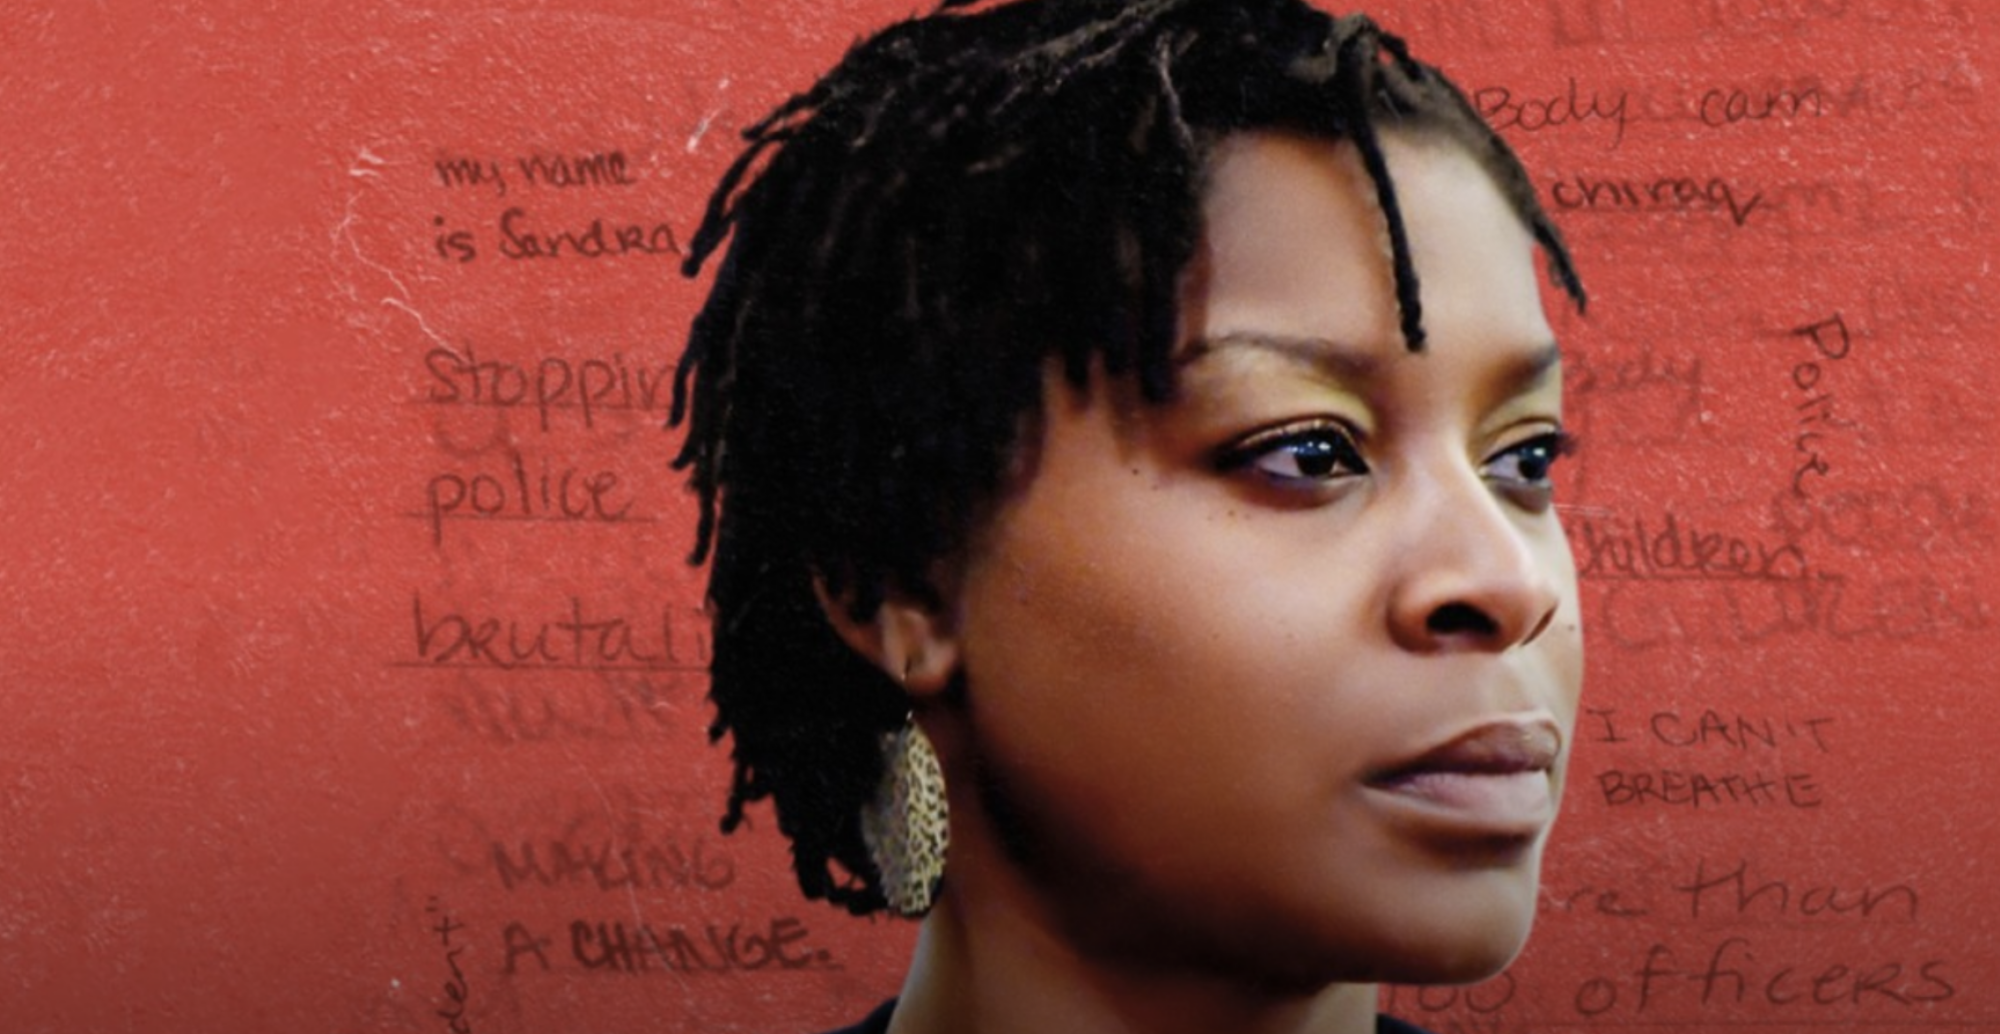 Sandra Bland in front of a red background